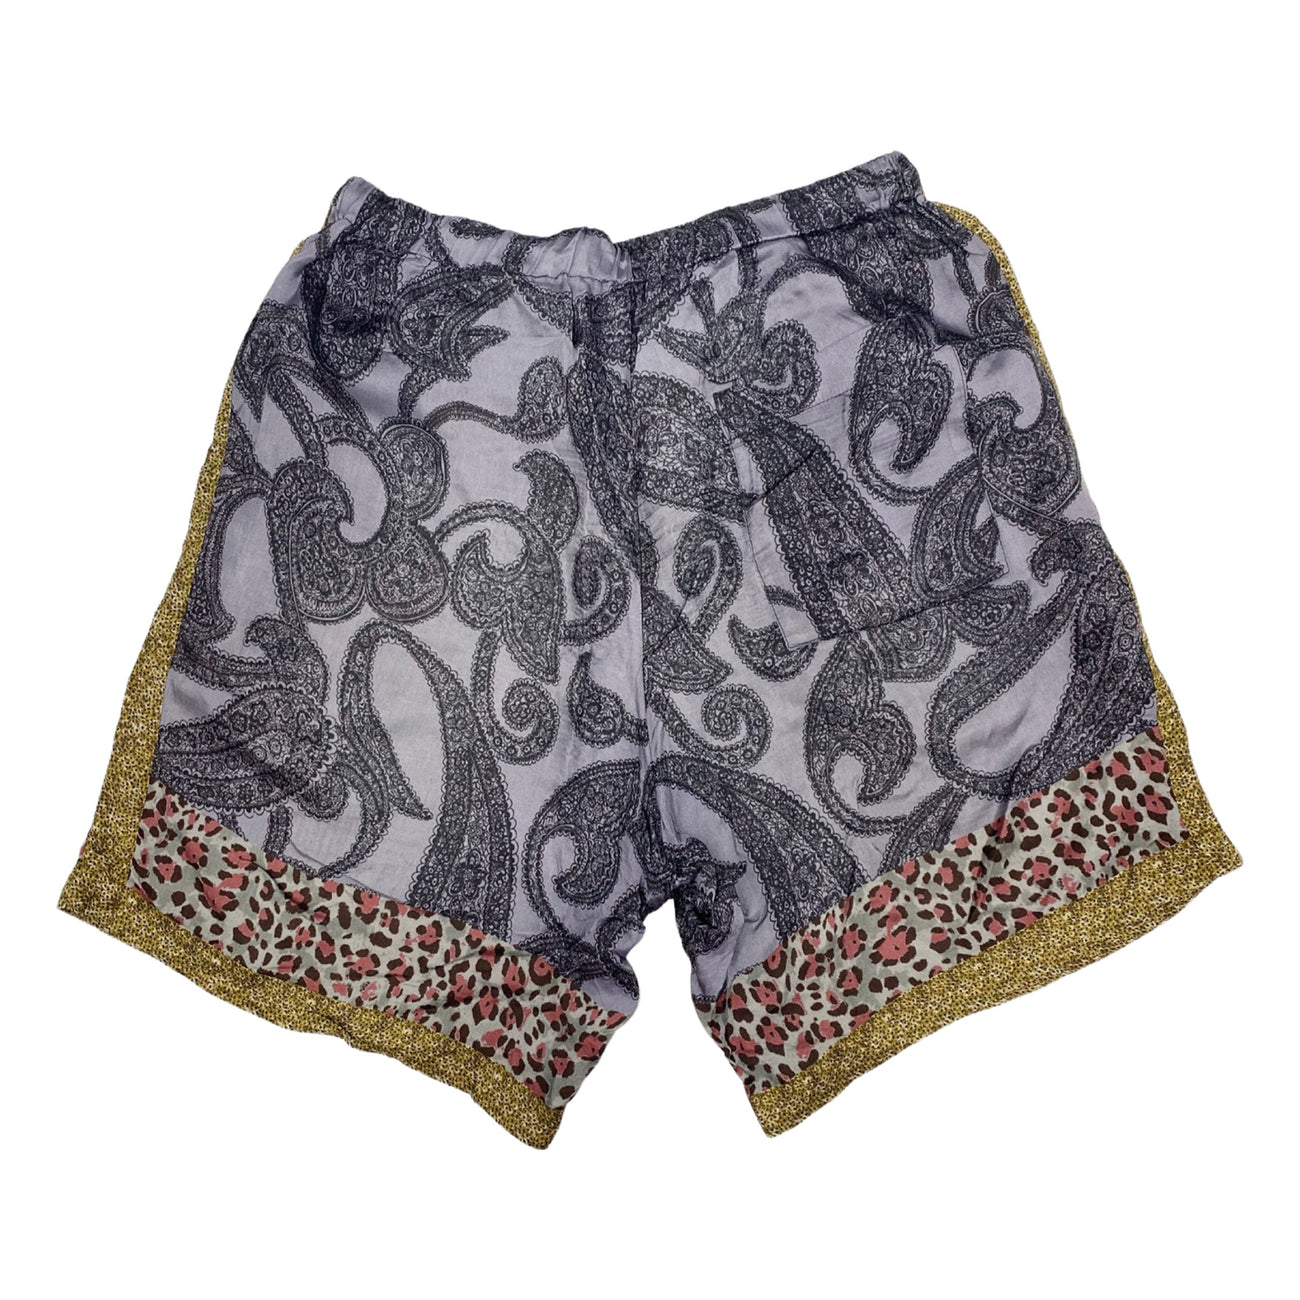 DRIES VAN NOTEN multicolour animal and abstract print shorts